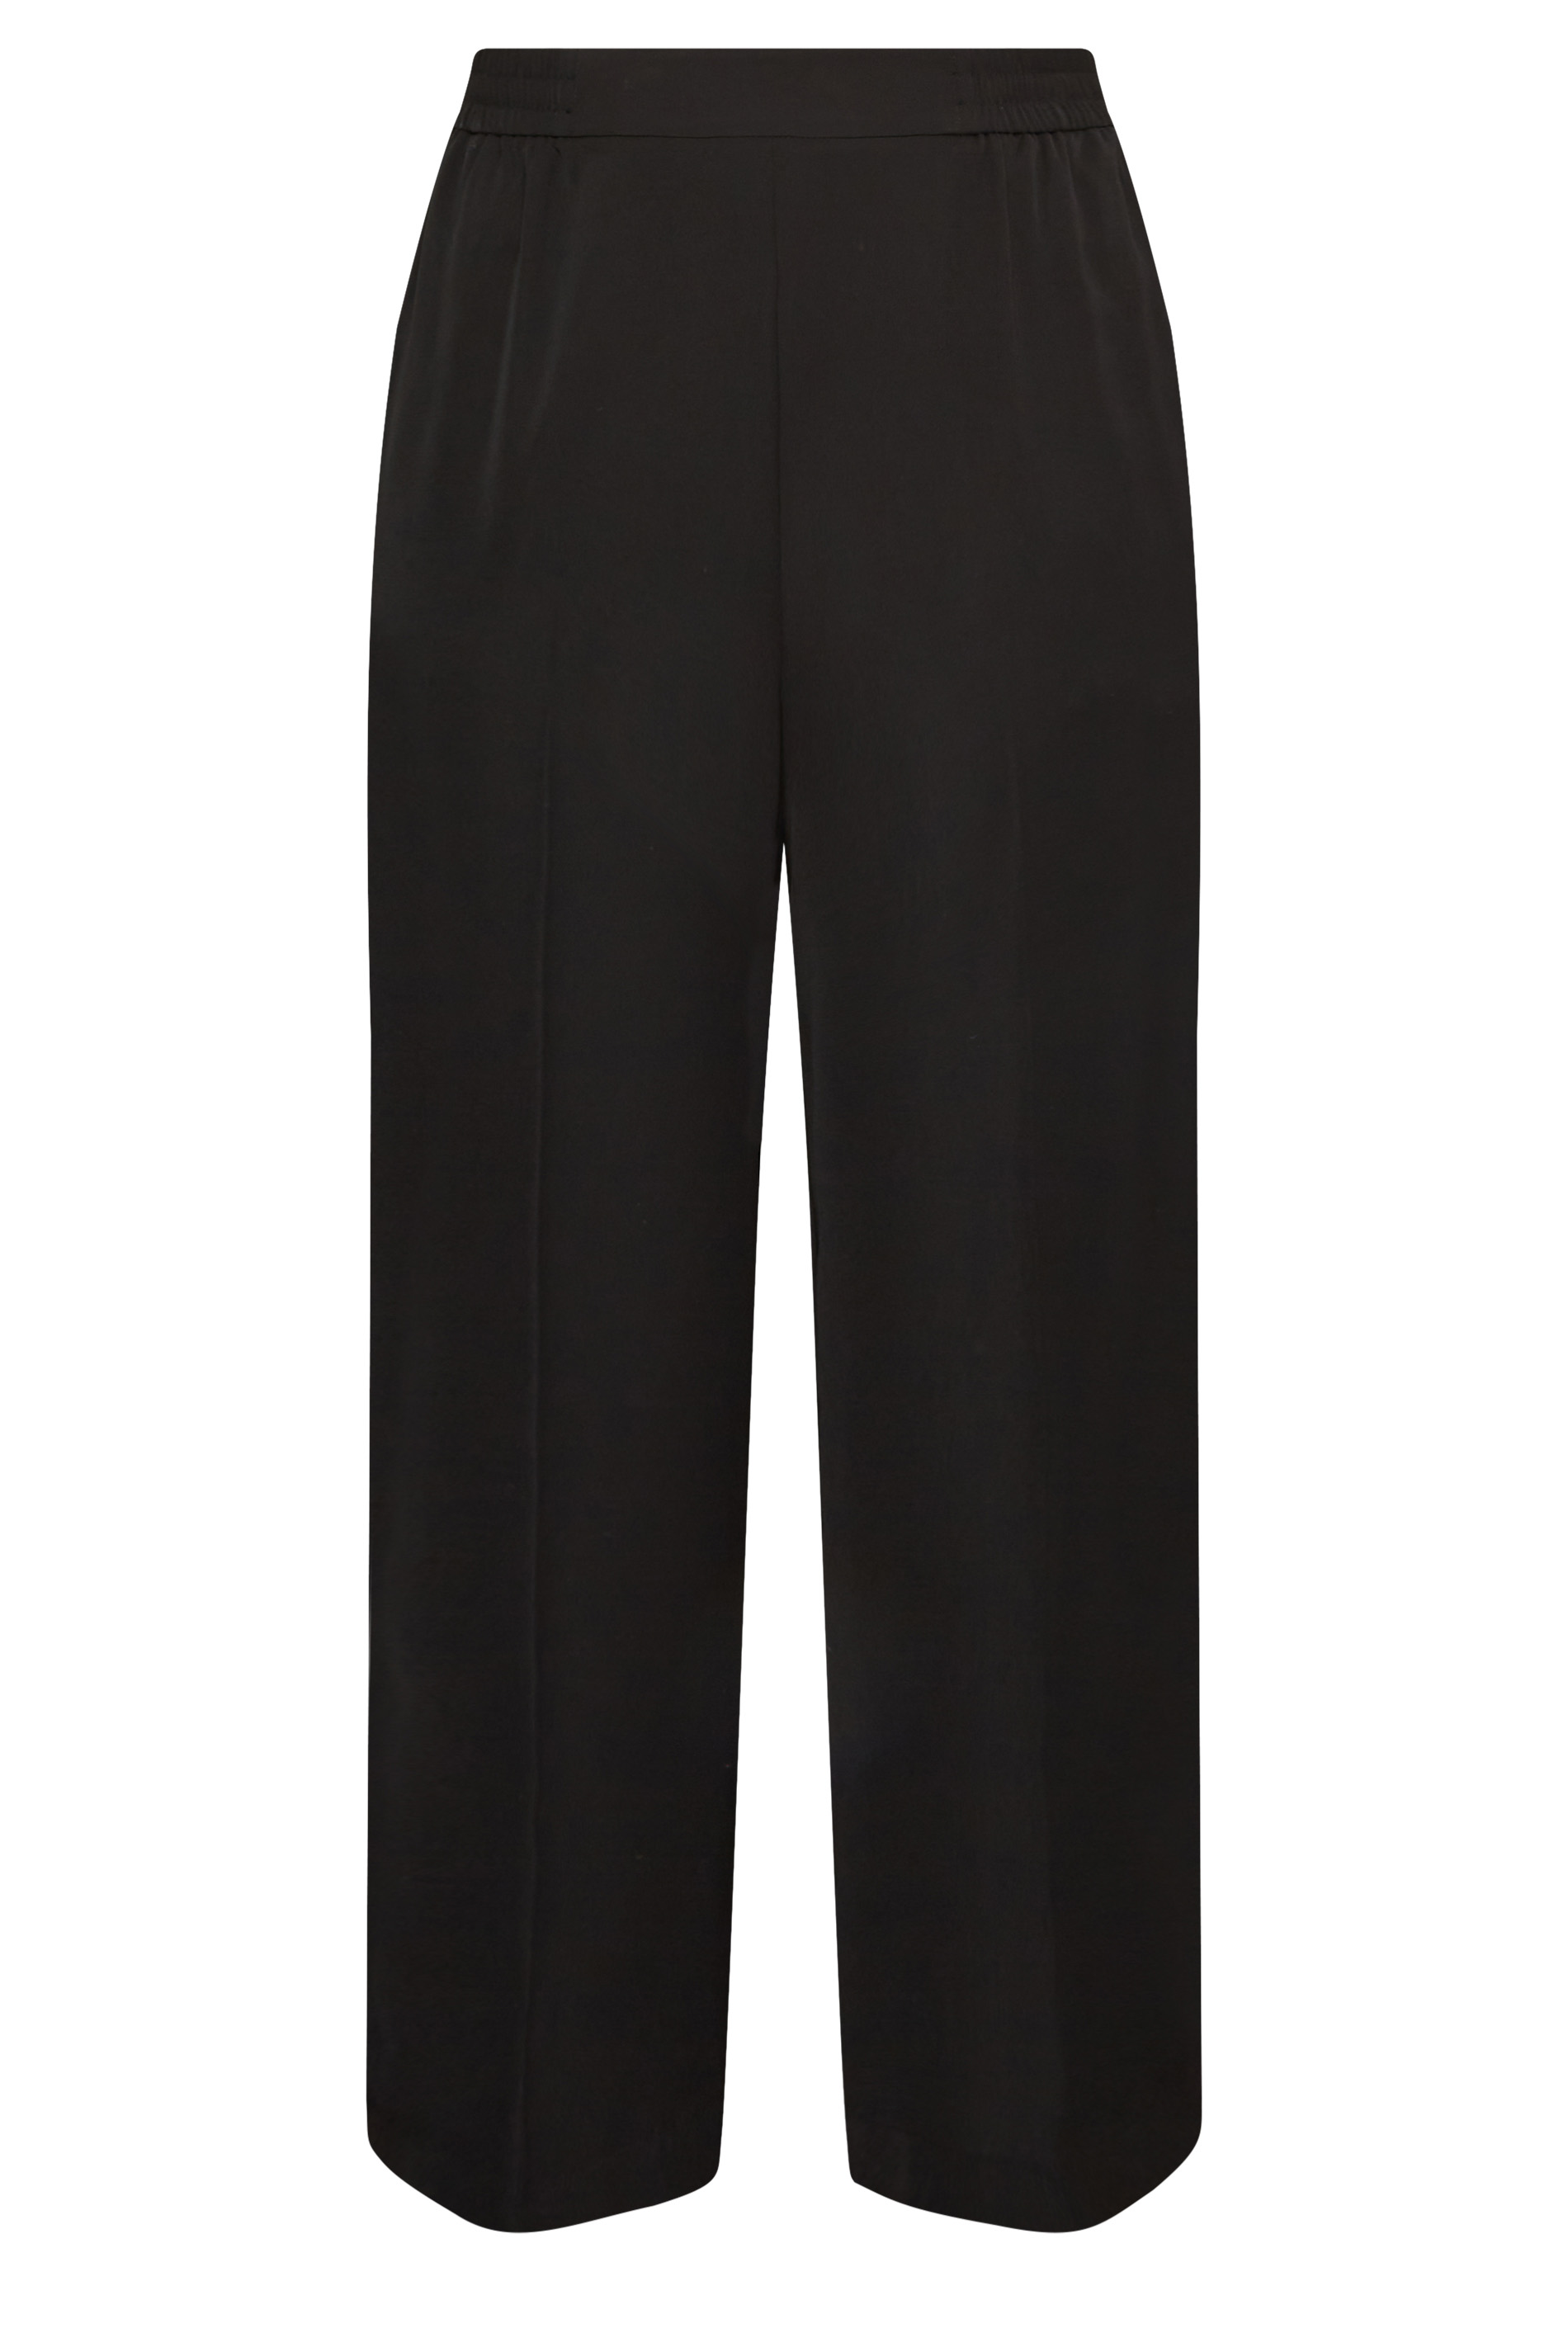 YOURS Plus Size Black Elasticated Waist Pull-On Wide Leg Trousers ...